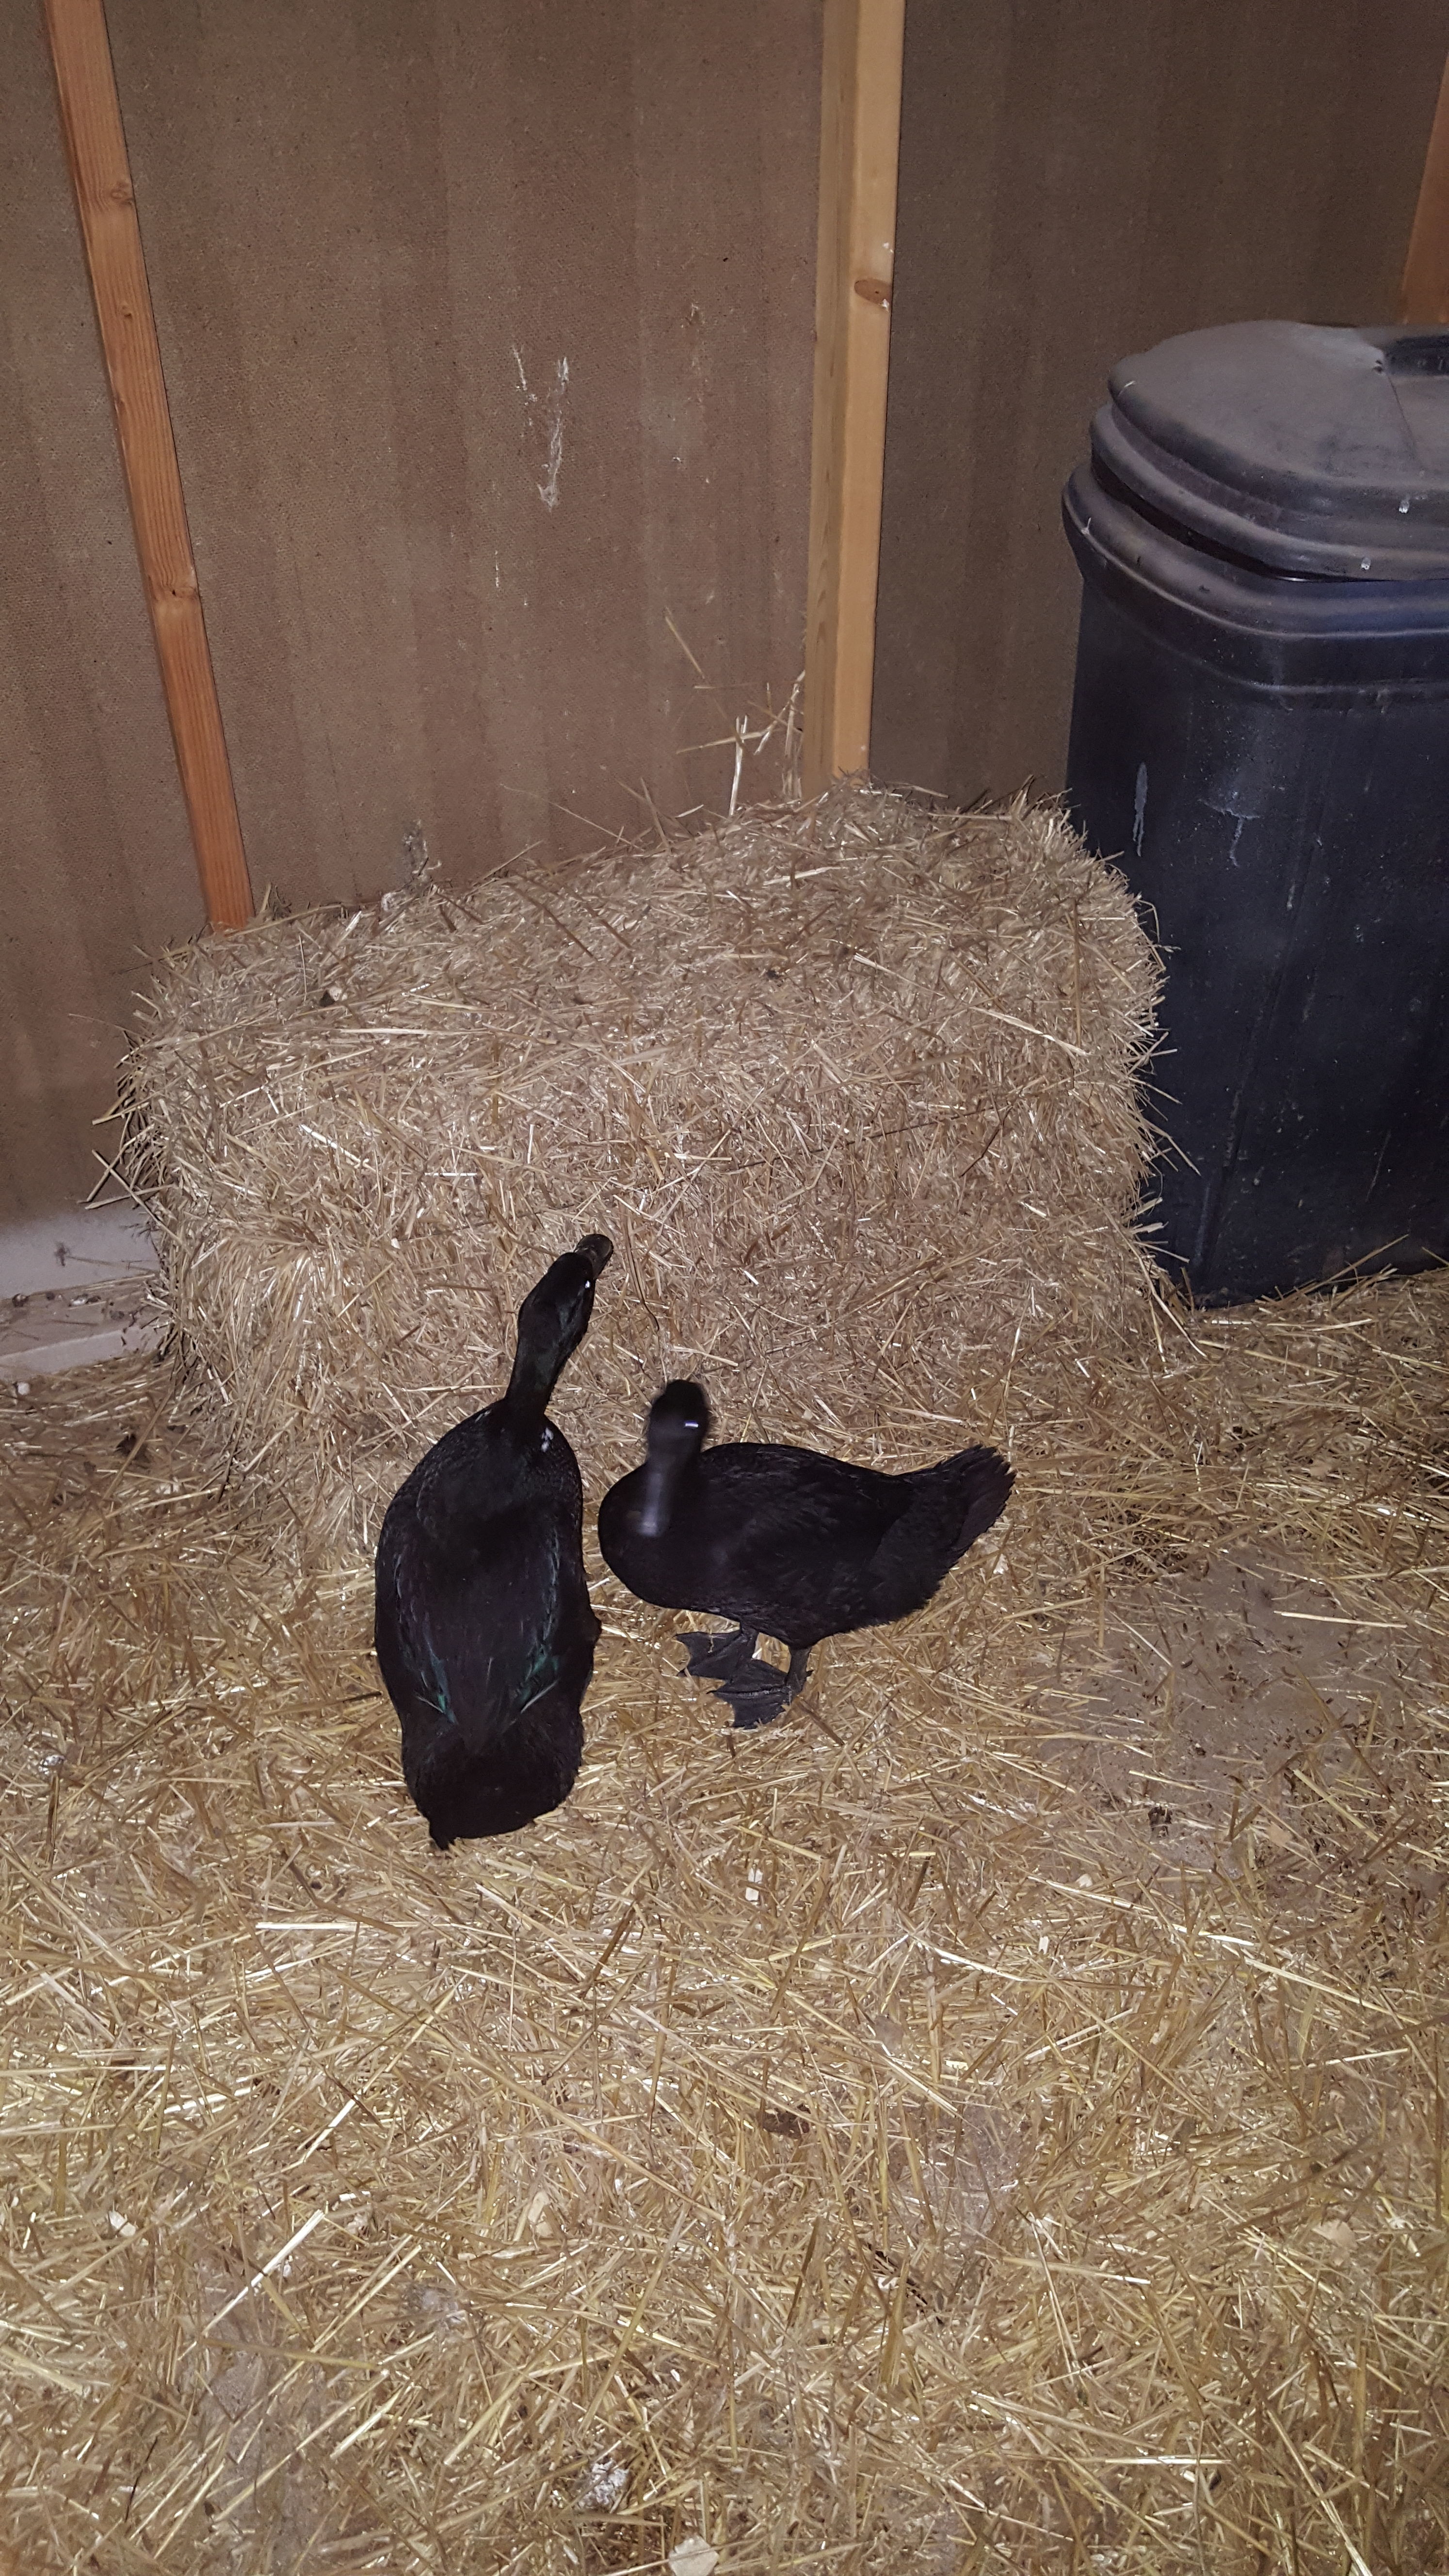 Percy and Pat again, probably around a month old in this picture! They're getting so big!! Living it up in the Grownups coop with all the big girls now!!